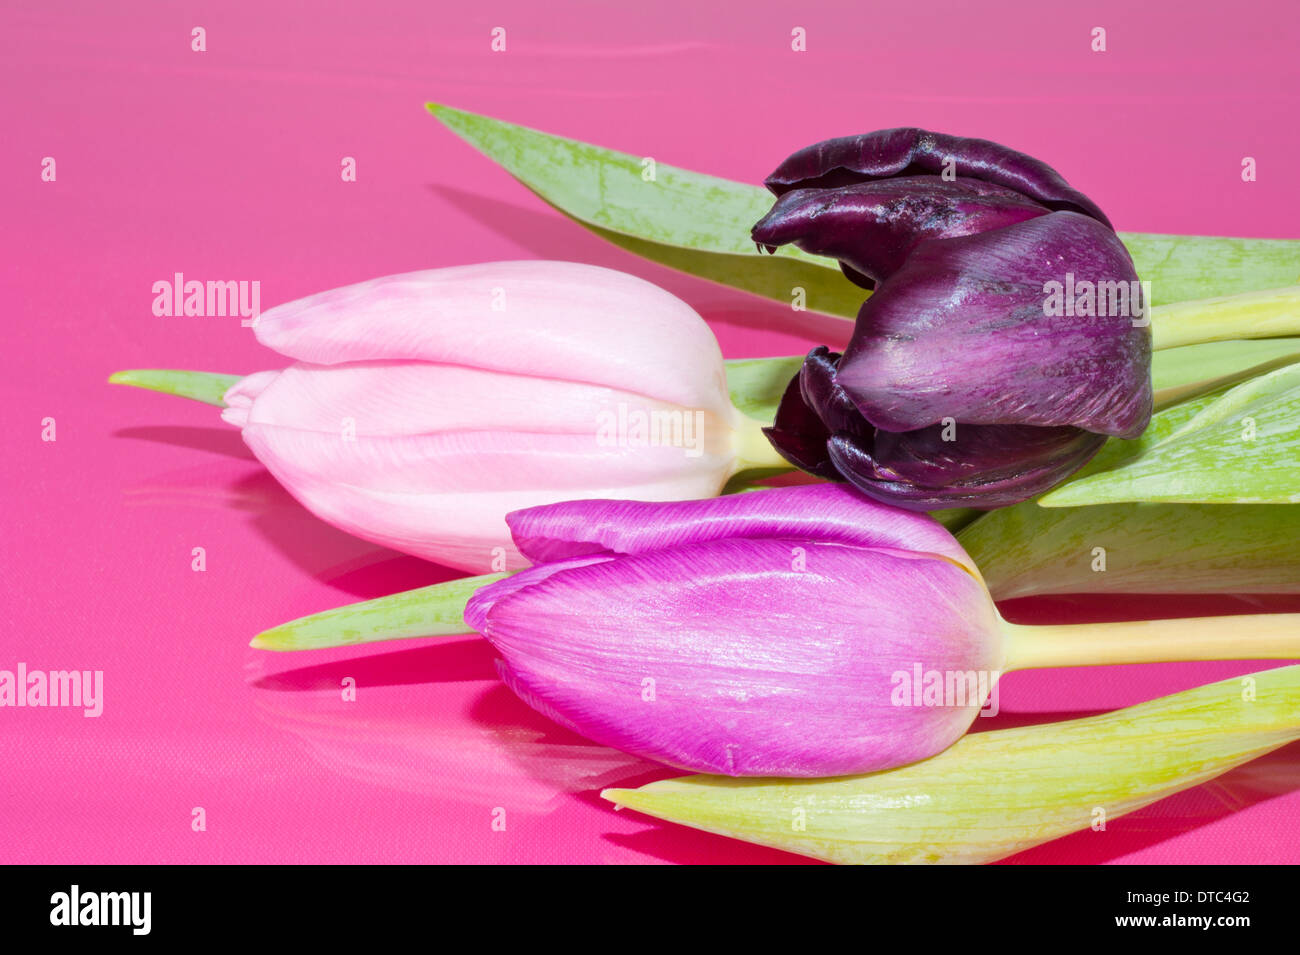 Bouquet of three Dutch Tulips on a pink background Stock Photo